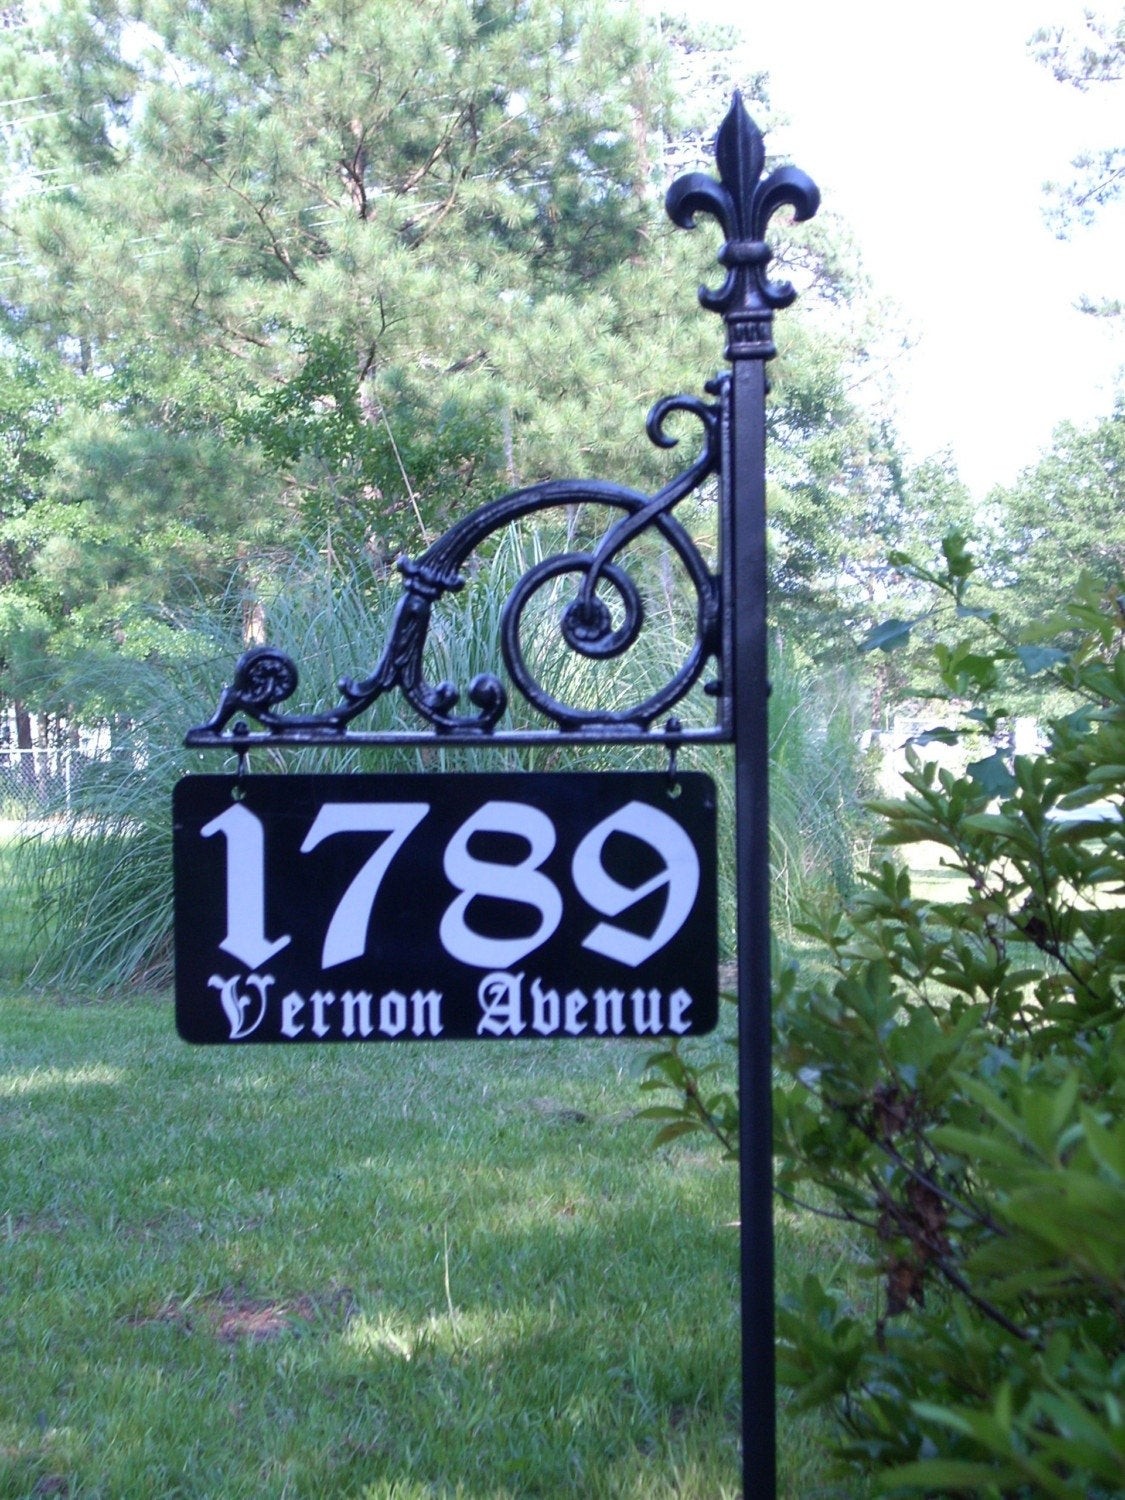 The victoria reflective address sign